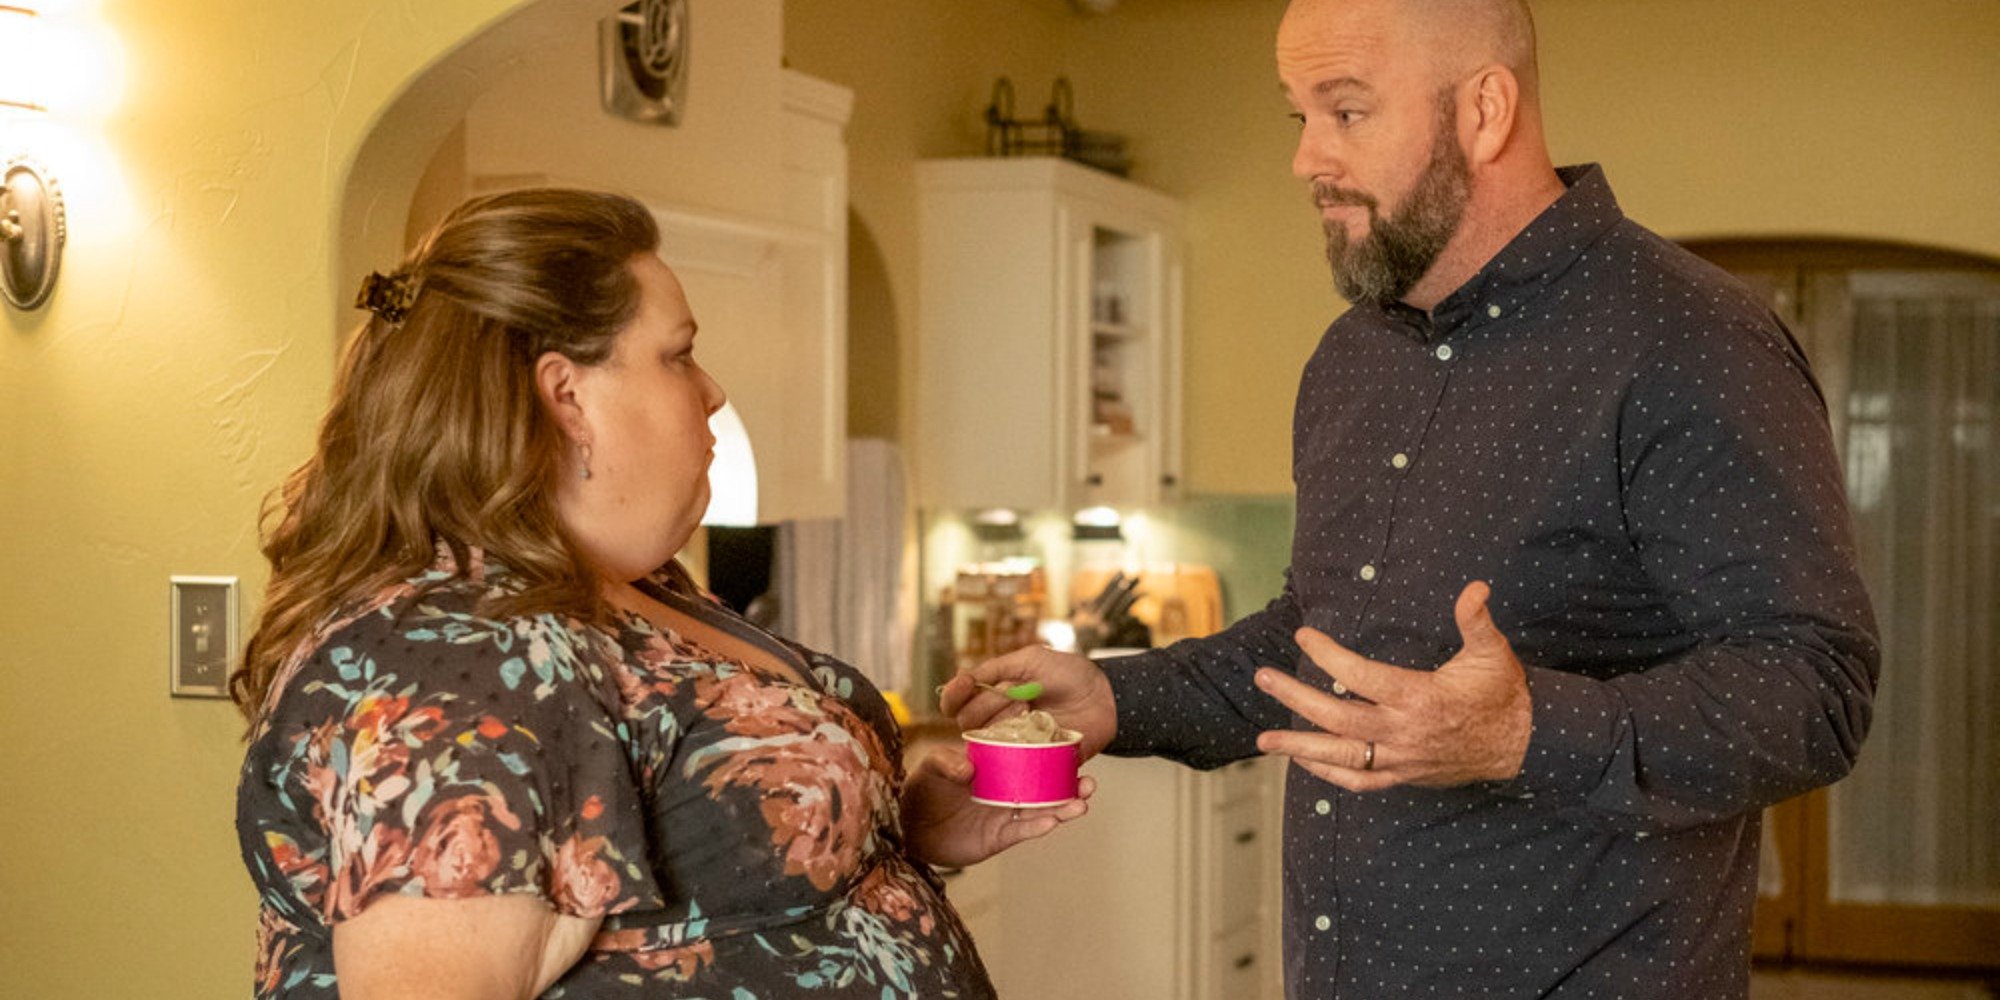 Chrissy Metz and Chris Sullivan on the set of This Is Us.